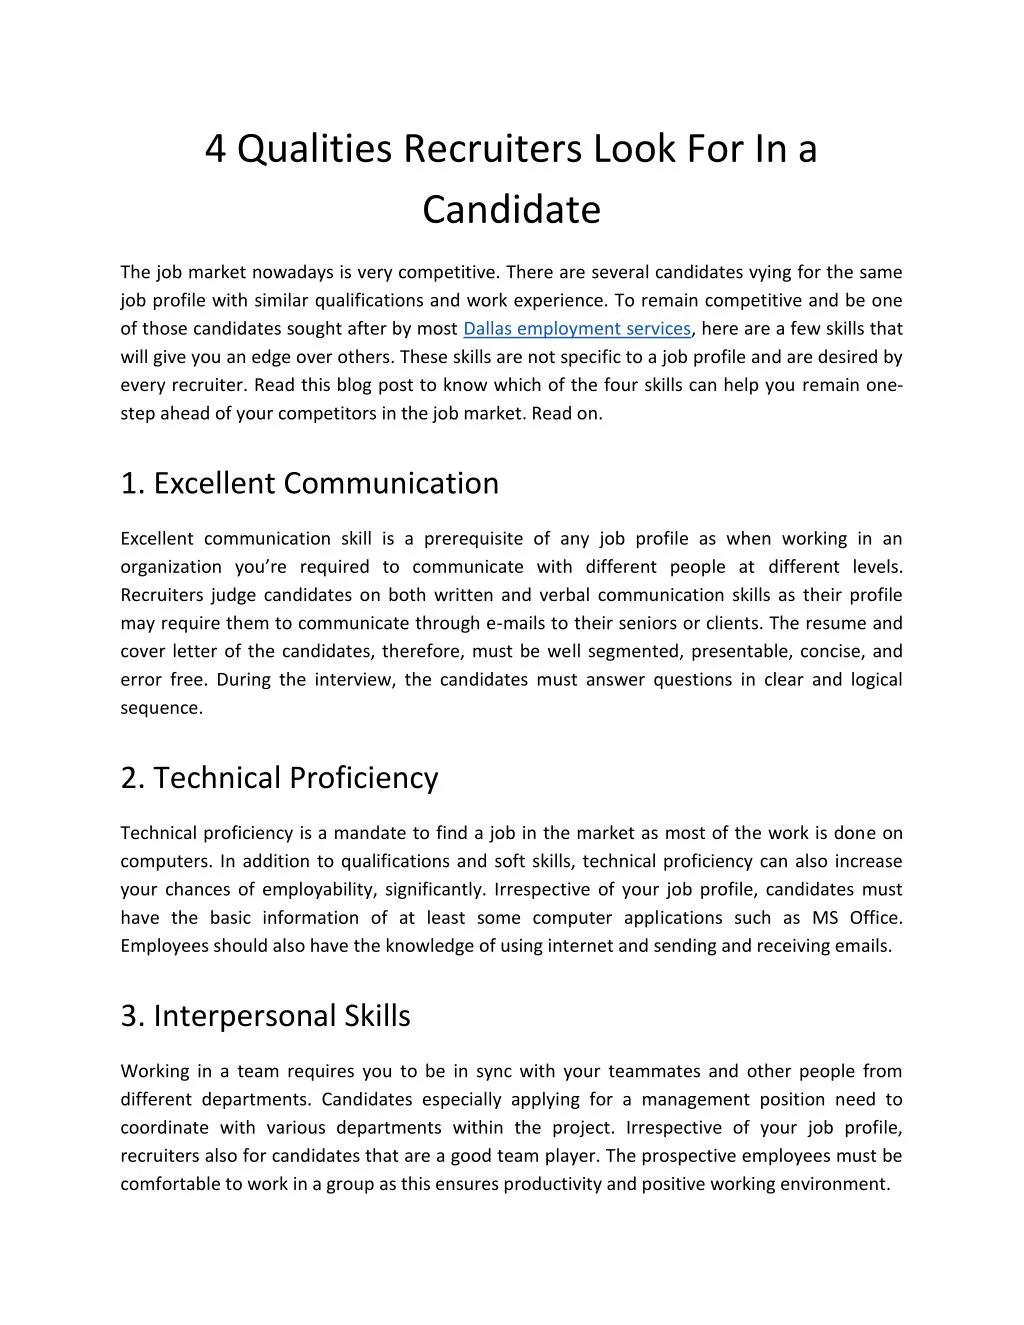 4 qualities recruiters look for in a candidate